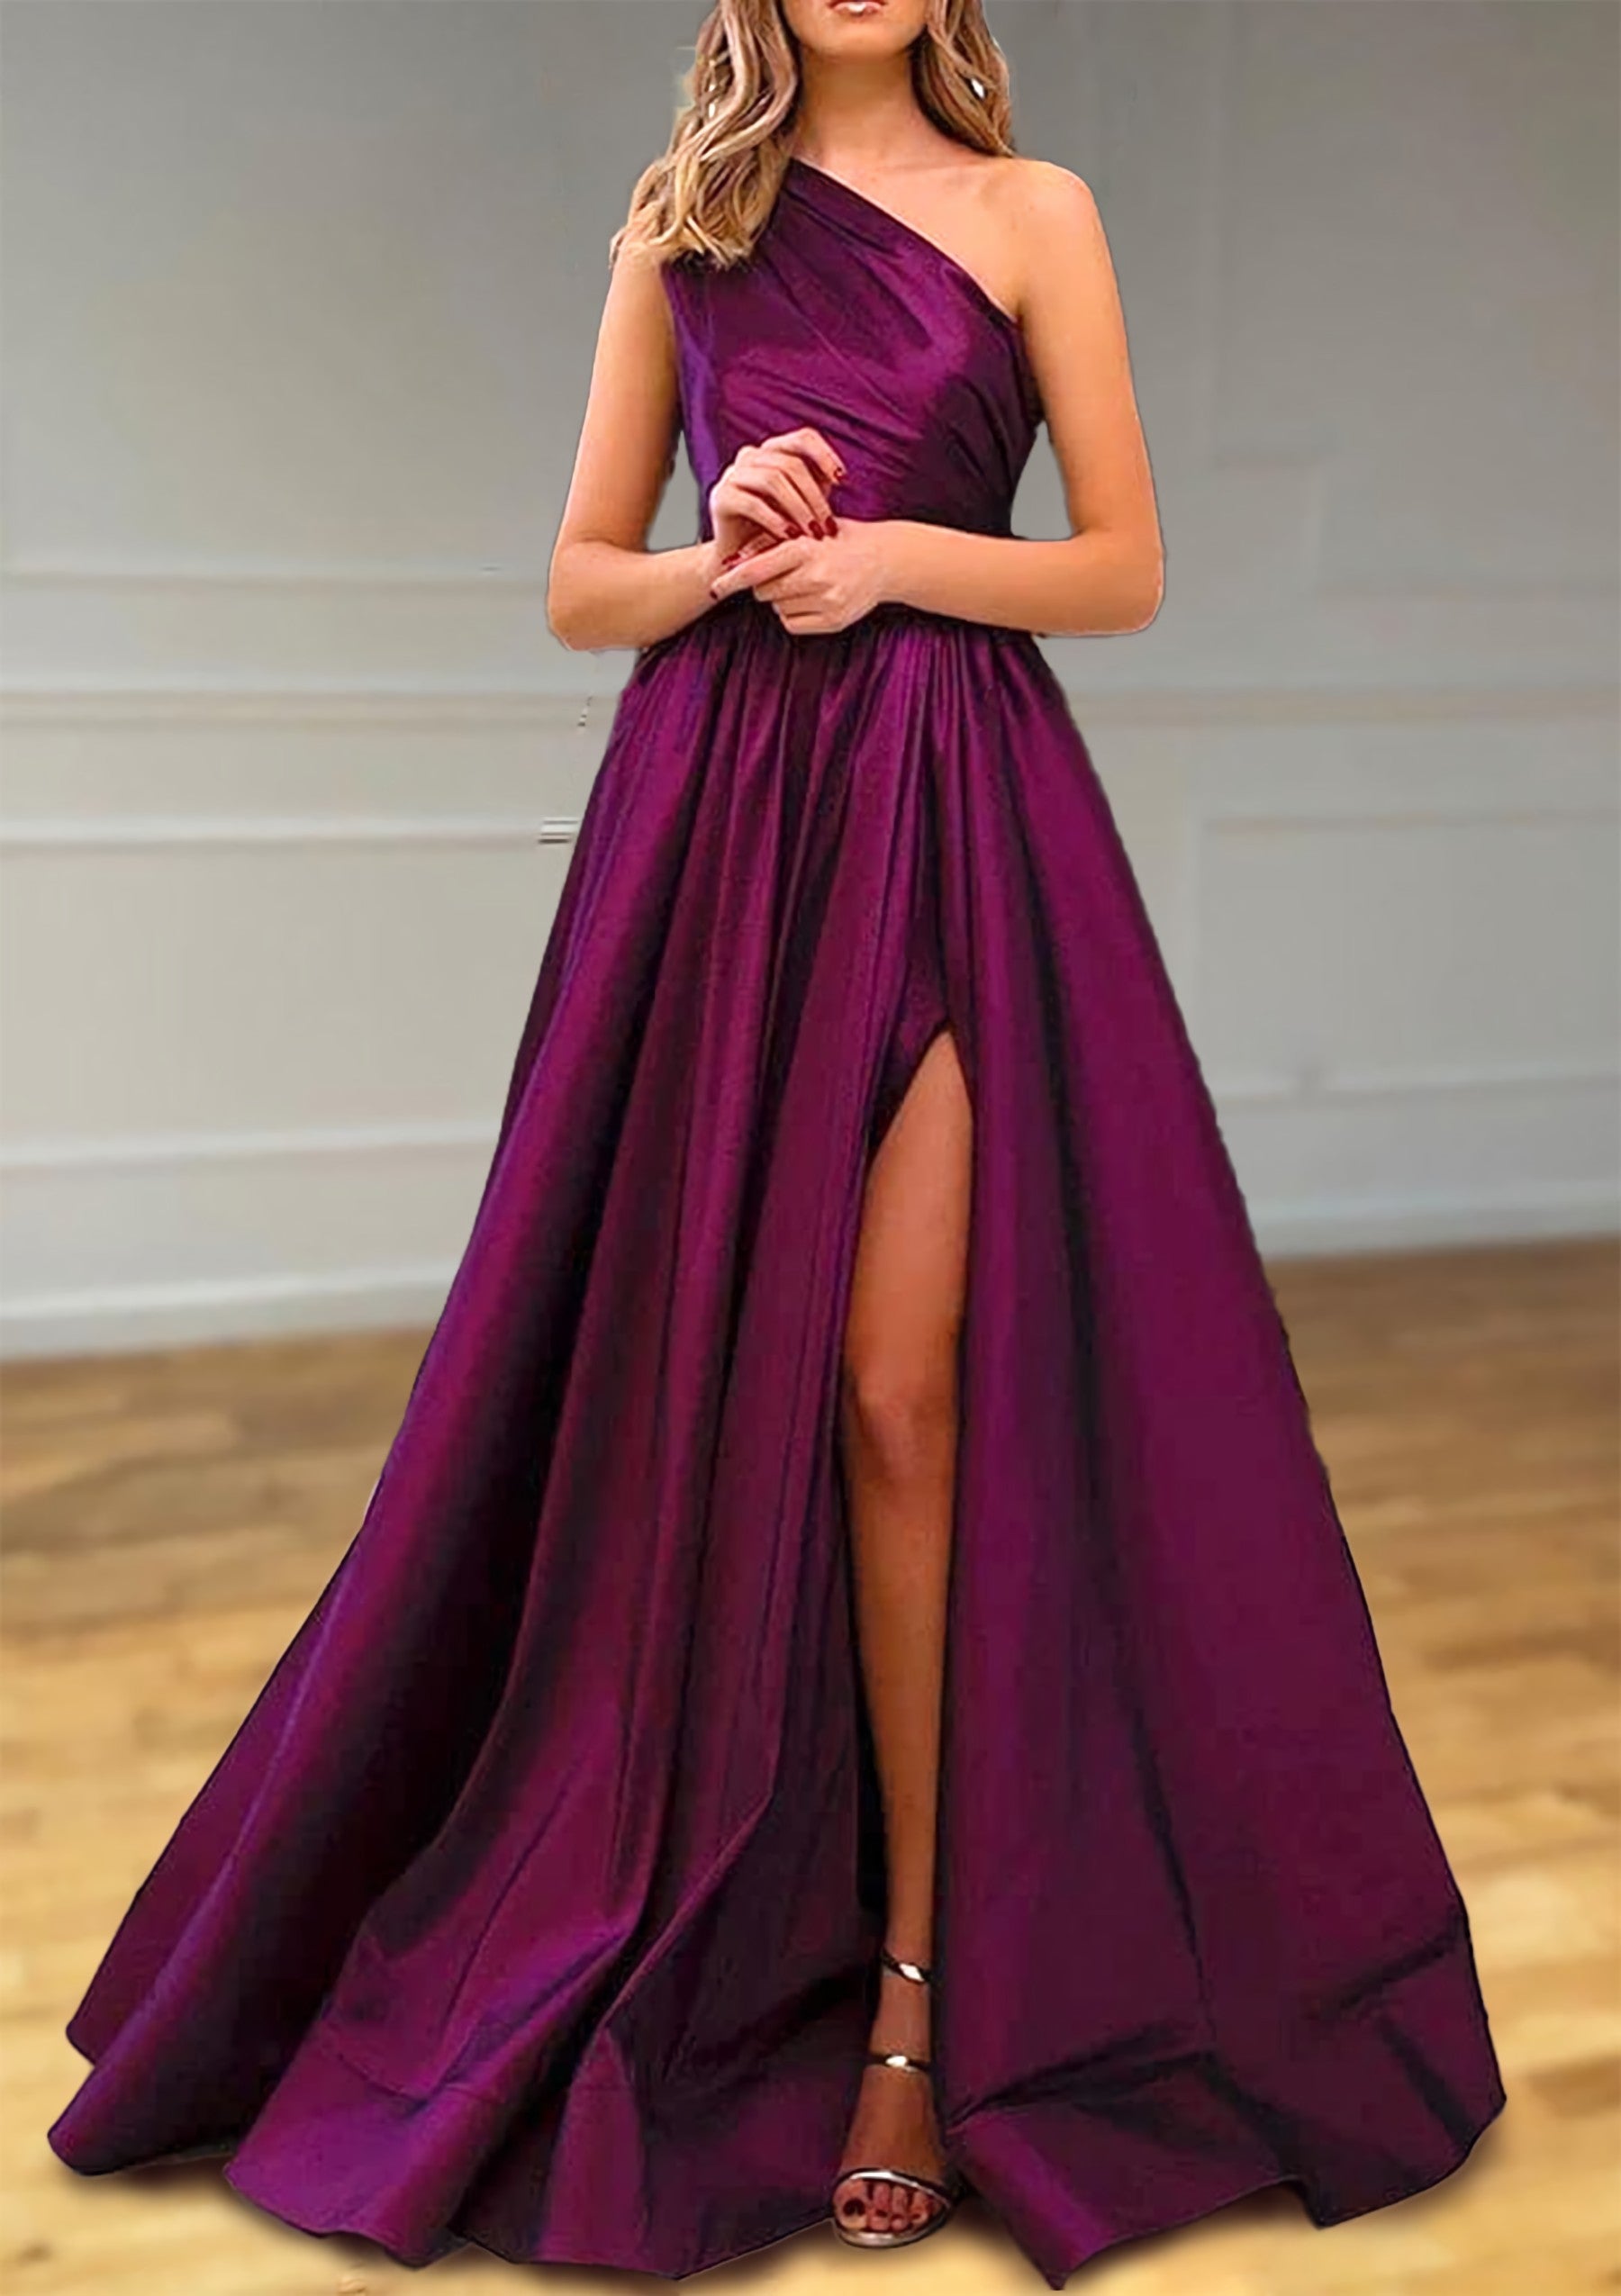 Party Dress Short Tight, A-line One-Shoulder Satin Prom Dress With Pleated Split